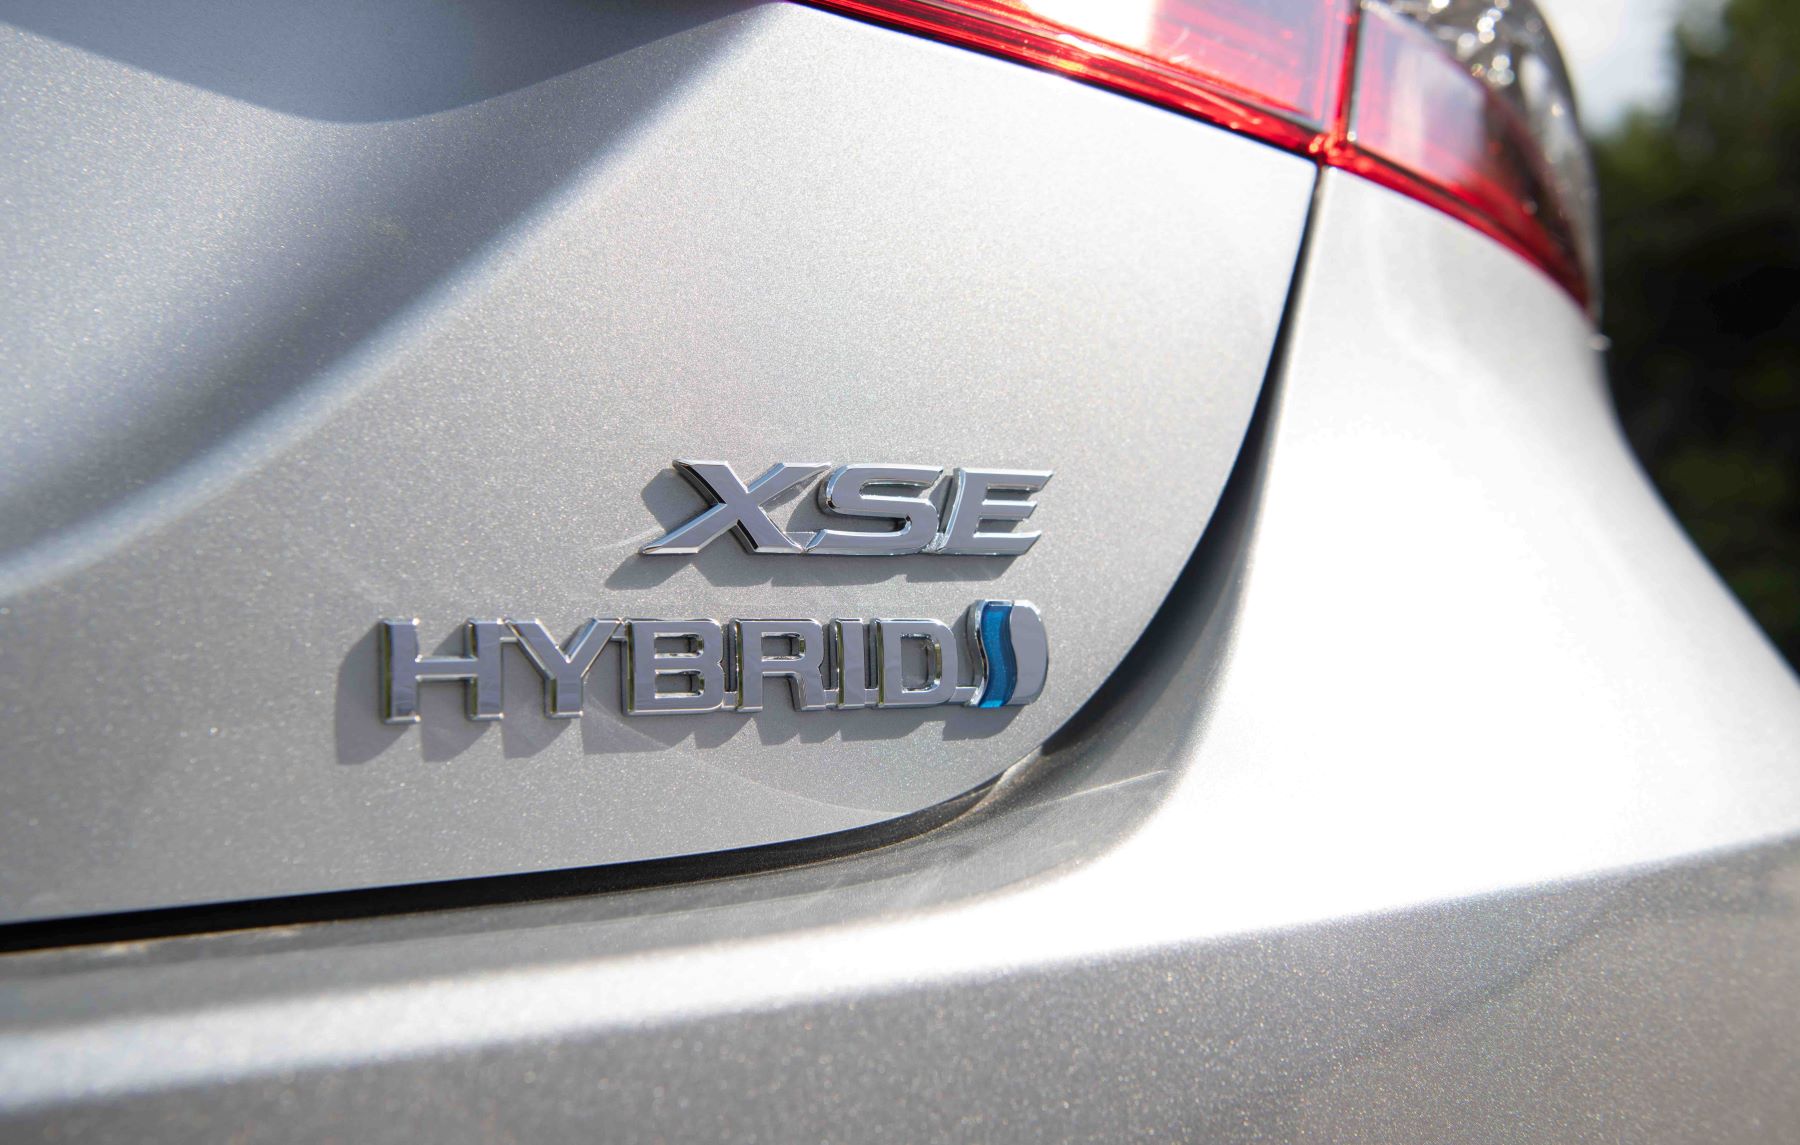 2022 Toyota Camry Hybrid XSE midsize sedan badging with a silver paint color option